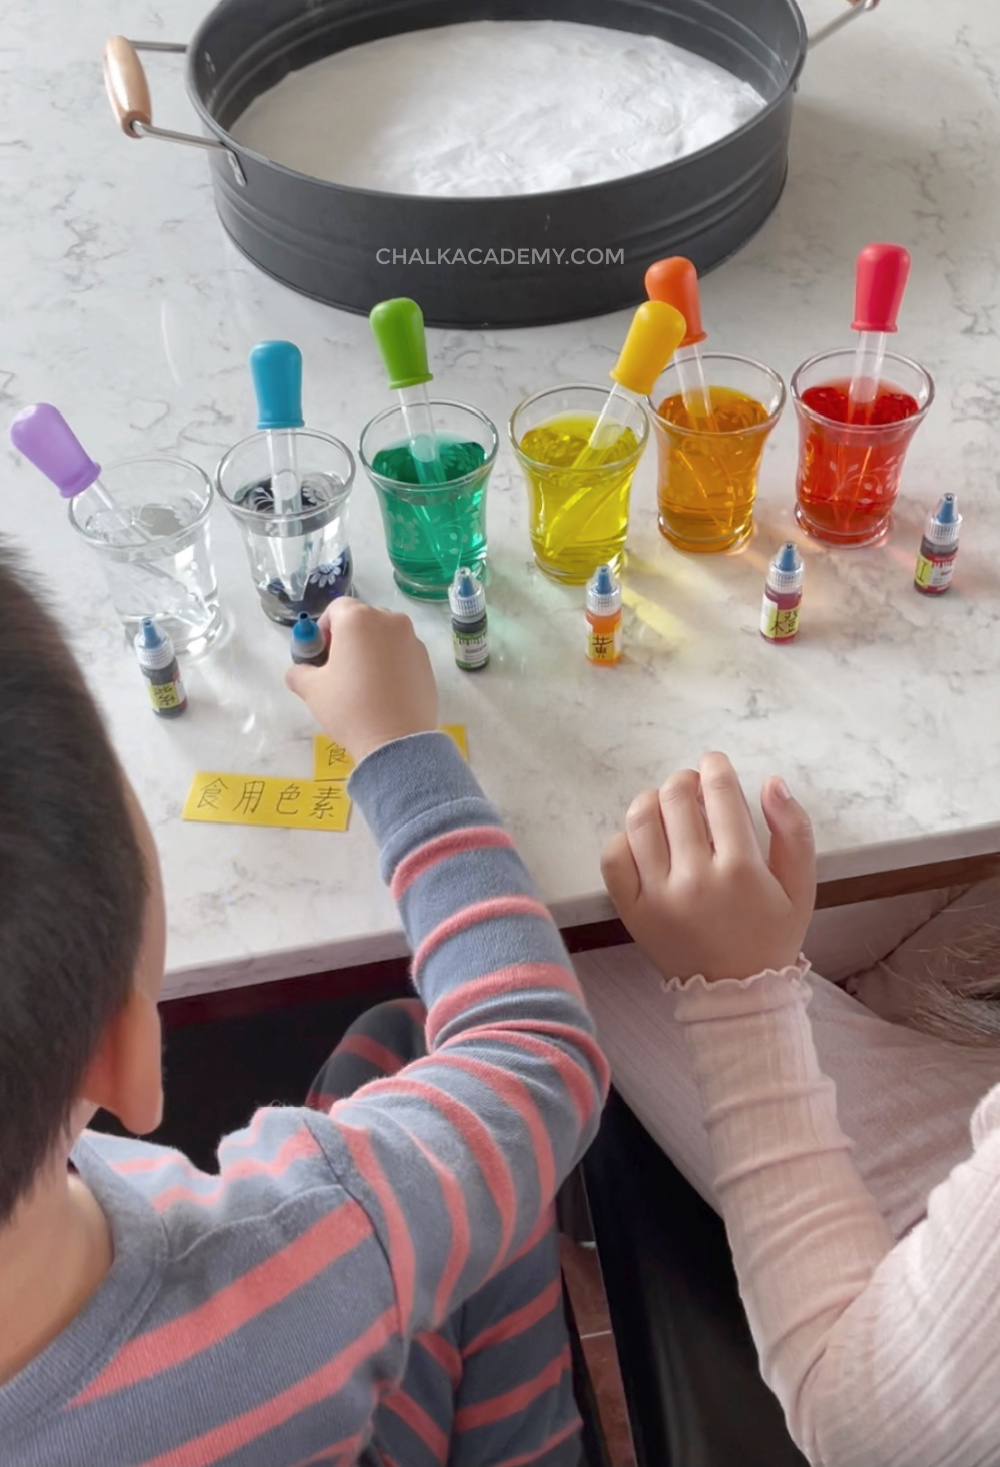 baking-soda-and-vinegar-experiments-color-explosion-science-for-kids